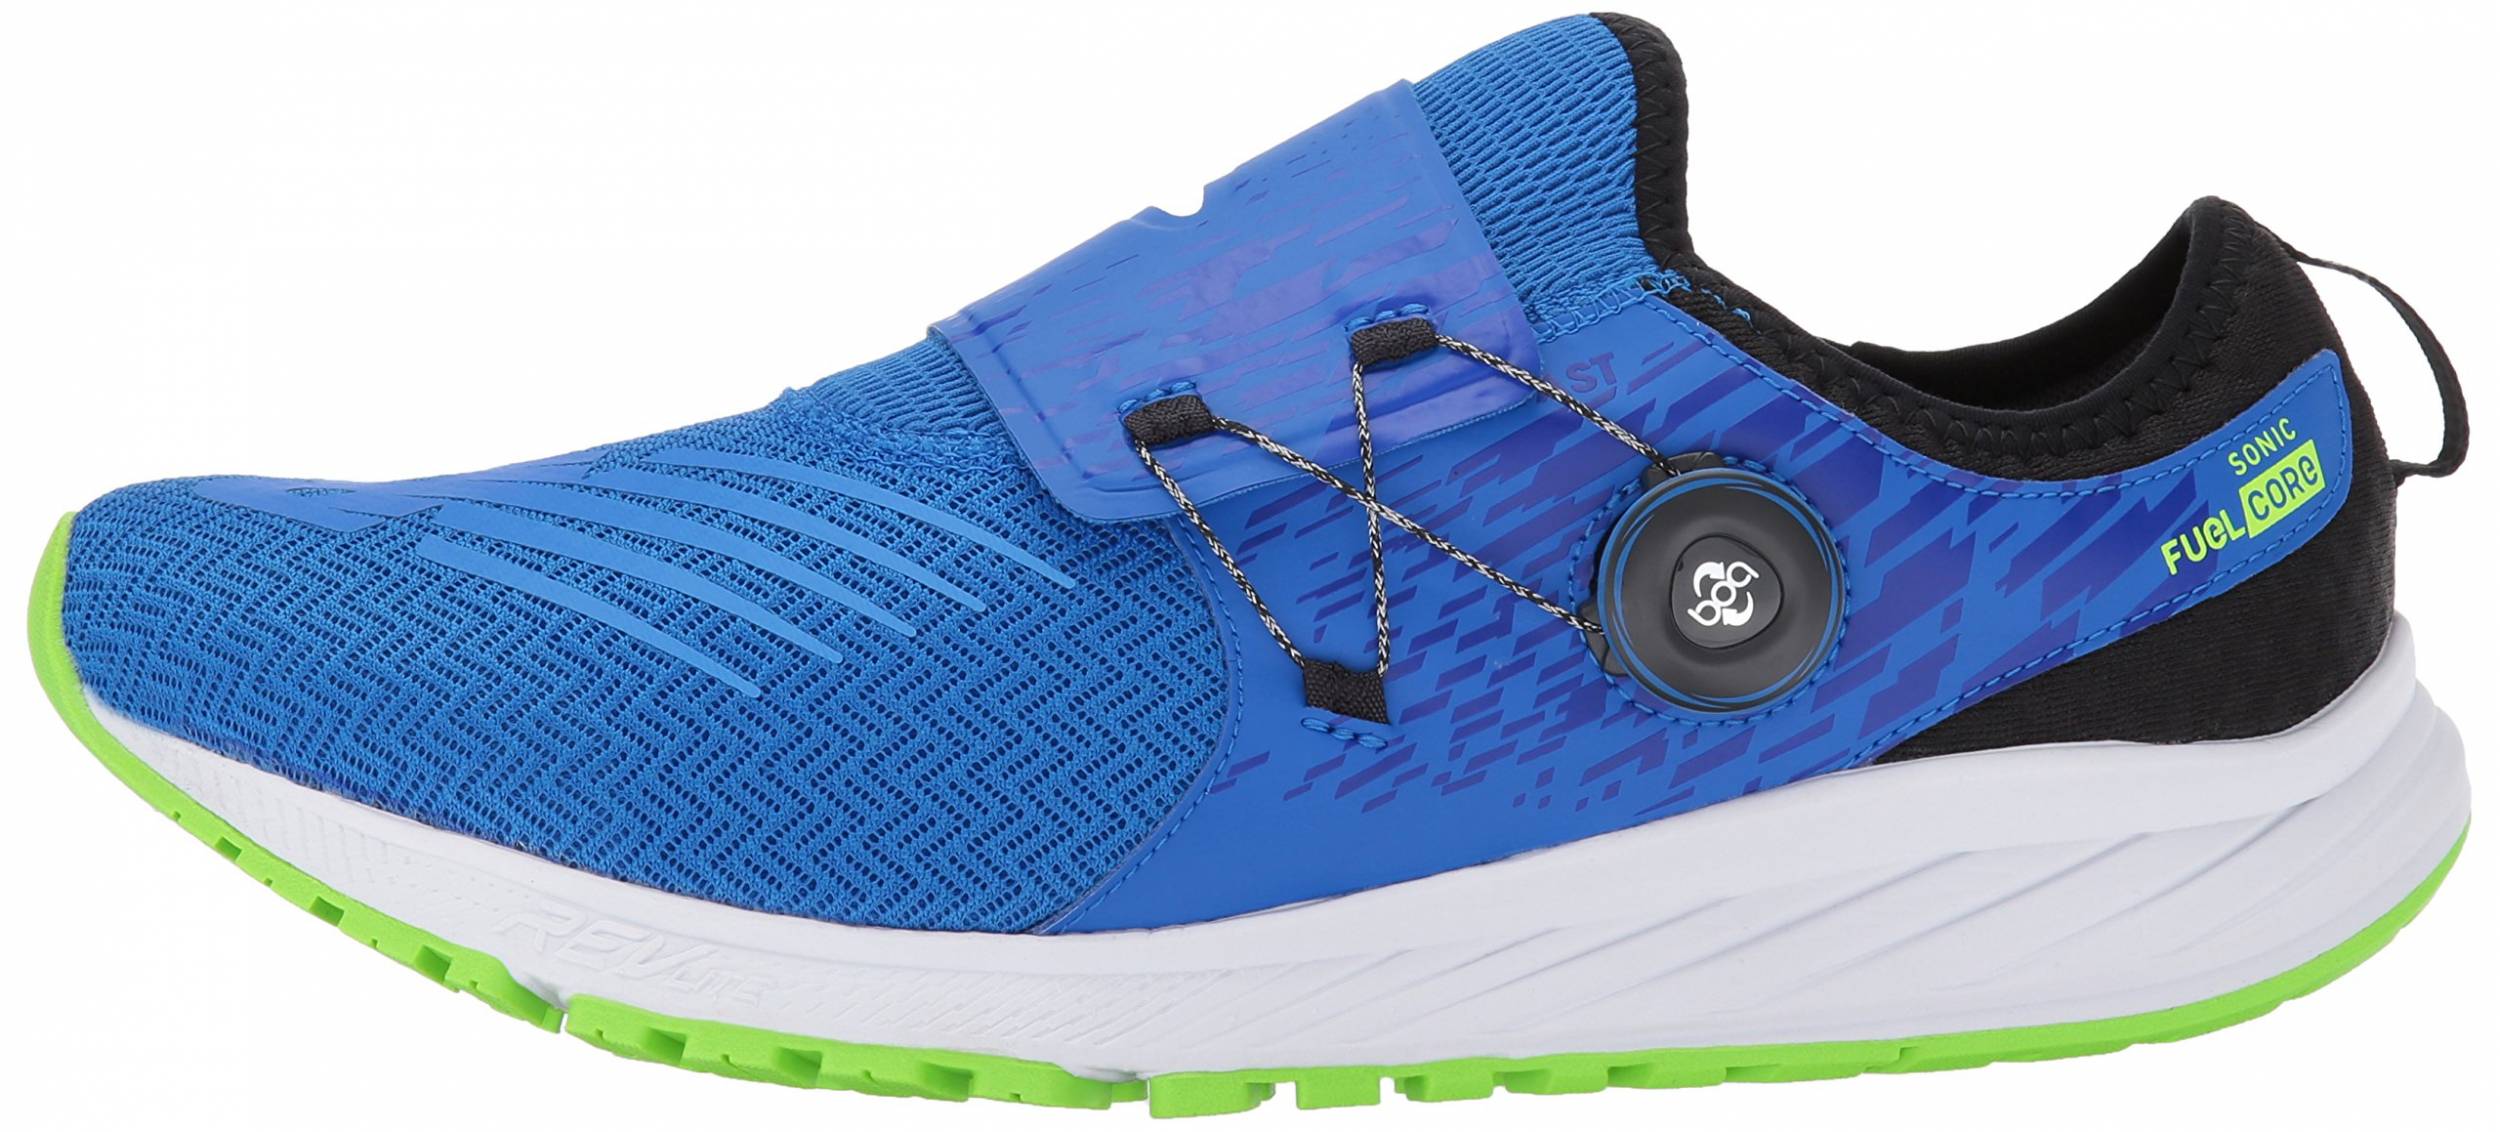 9 Reasons to/NOT to Buy New Balance FuelCore Sonic (Nov 2020) | RunRepeat